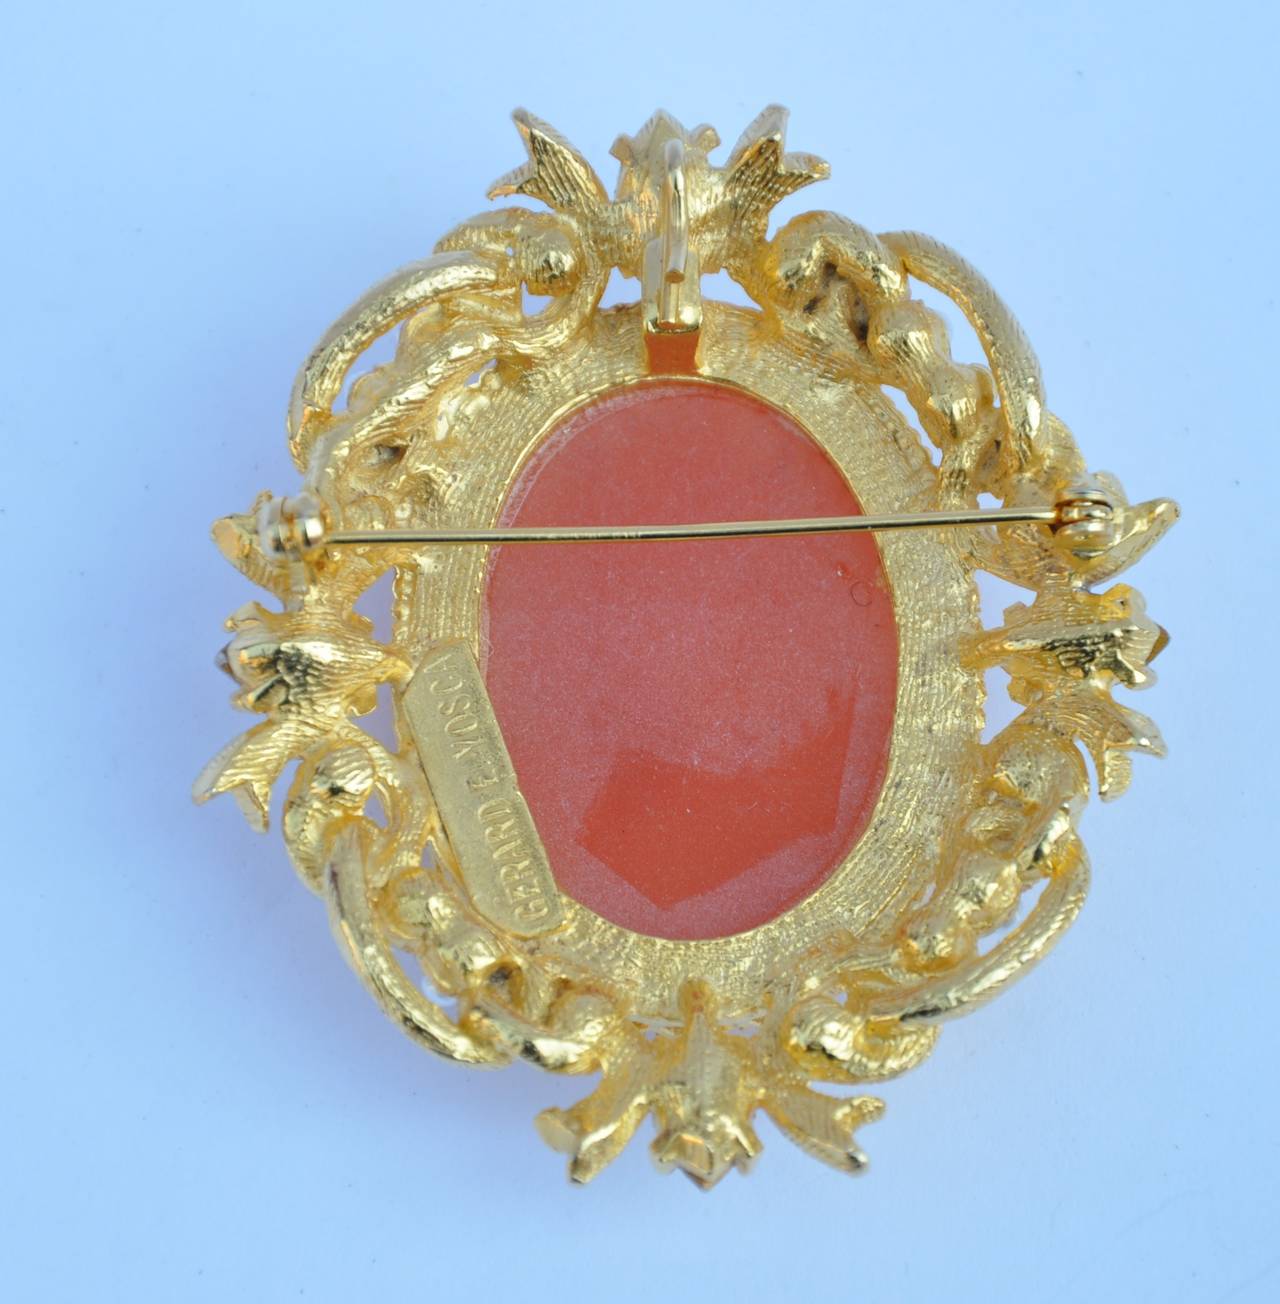 Gerard E. Yosca huge gilded gold vermeil finish cameo brooch is accented with seed pearls and rhinestones. The brooch measures 2 1/8" in length, 2 1/2" in height and 1/2" in depth.